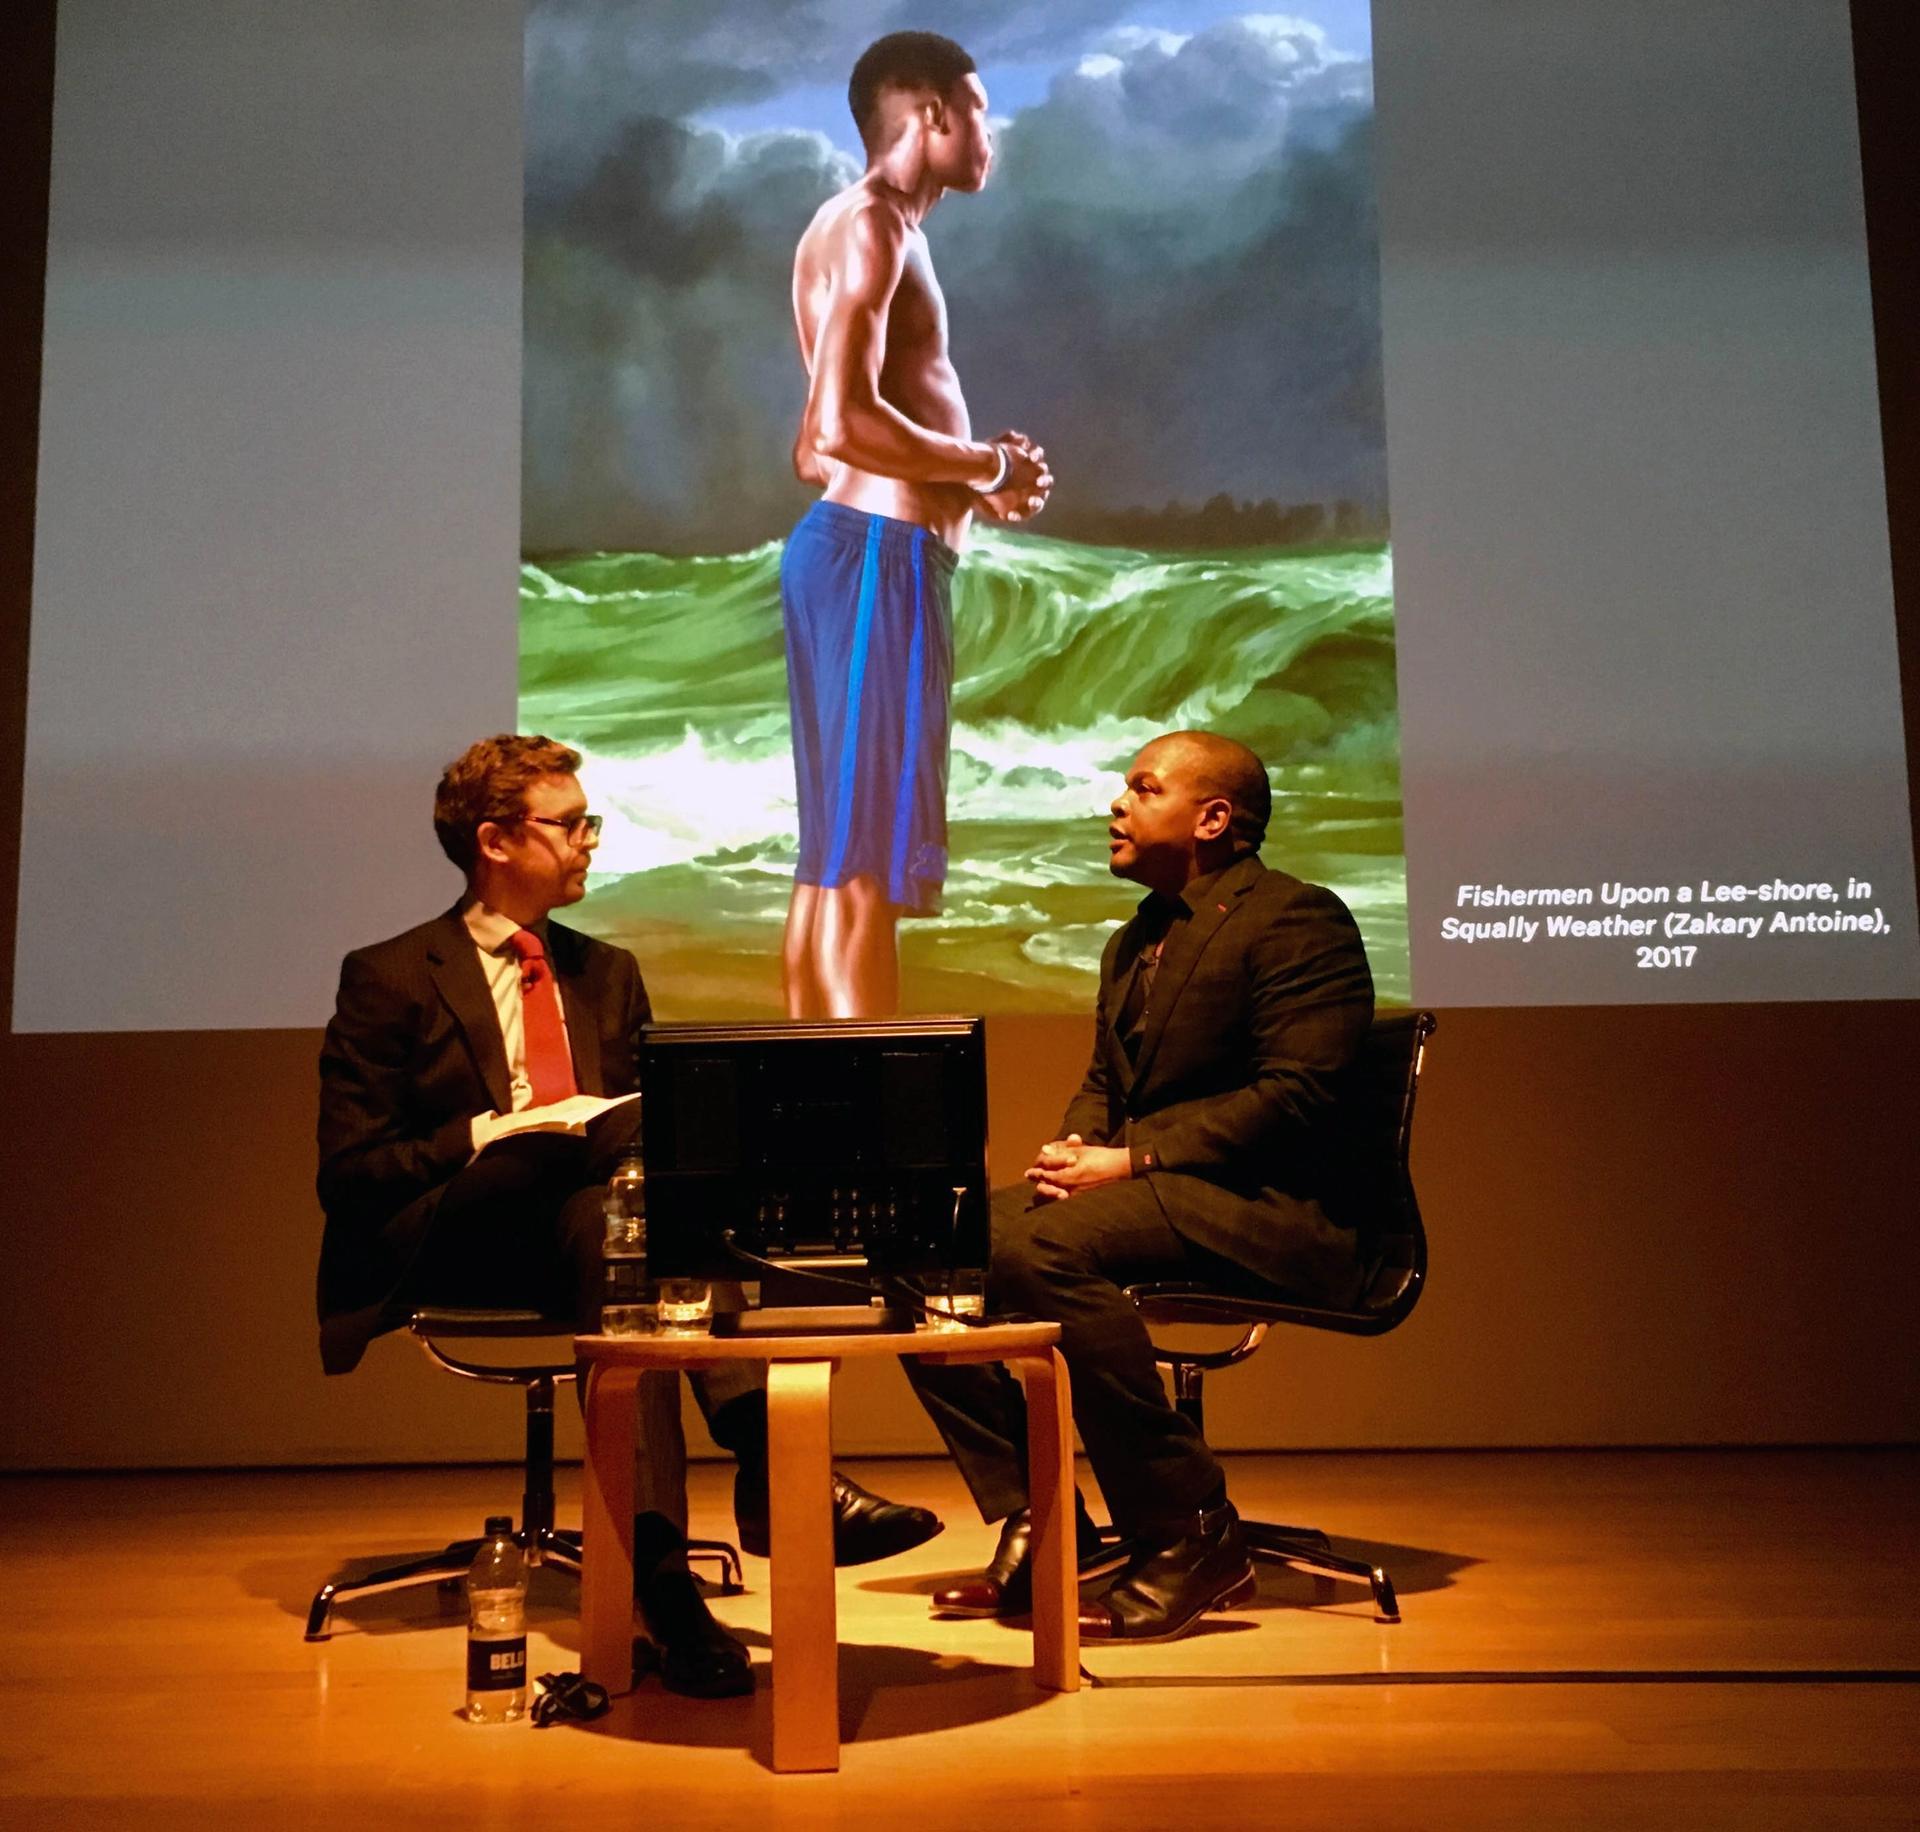 The National Portrait Gallery’s director Nicholas Cullinan in conversation with Kehinde Wiley Louisa Buck